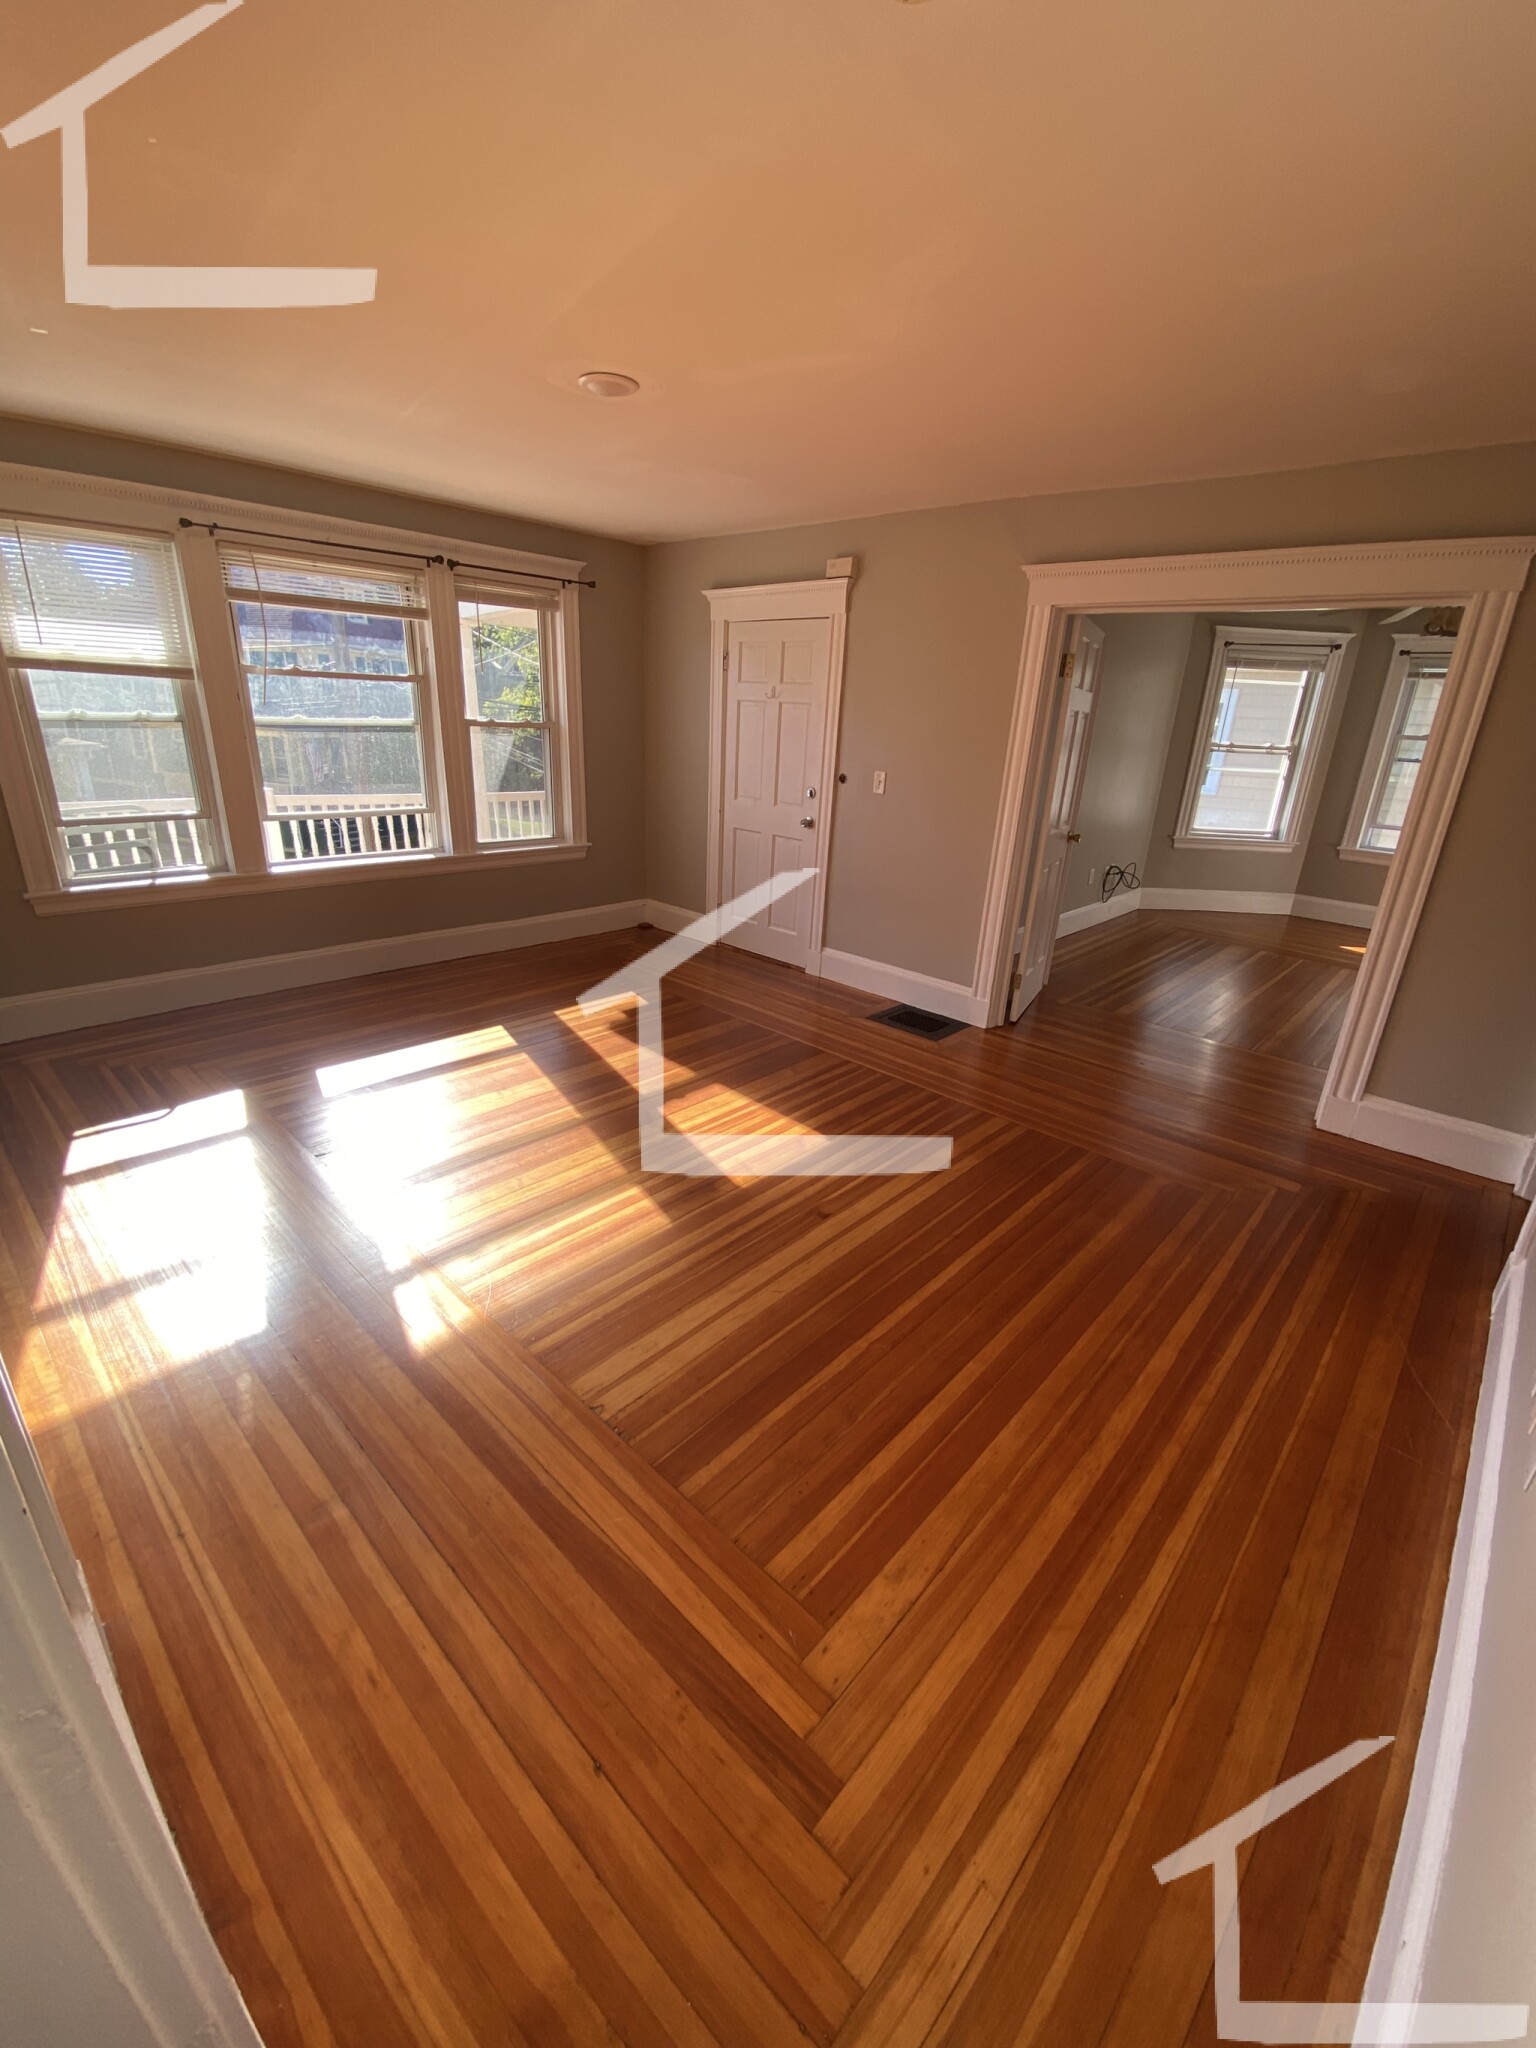 Photos of apartment on Bigelow St.,Quincy MA 02169